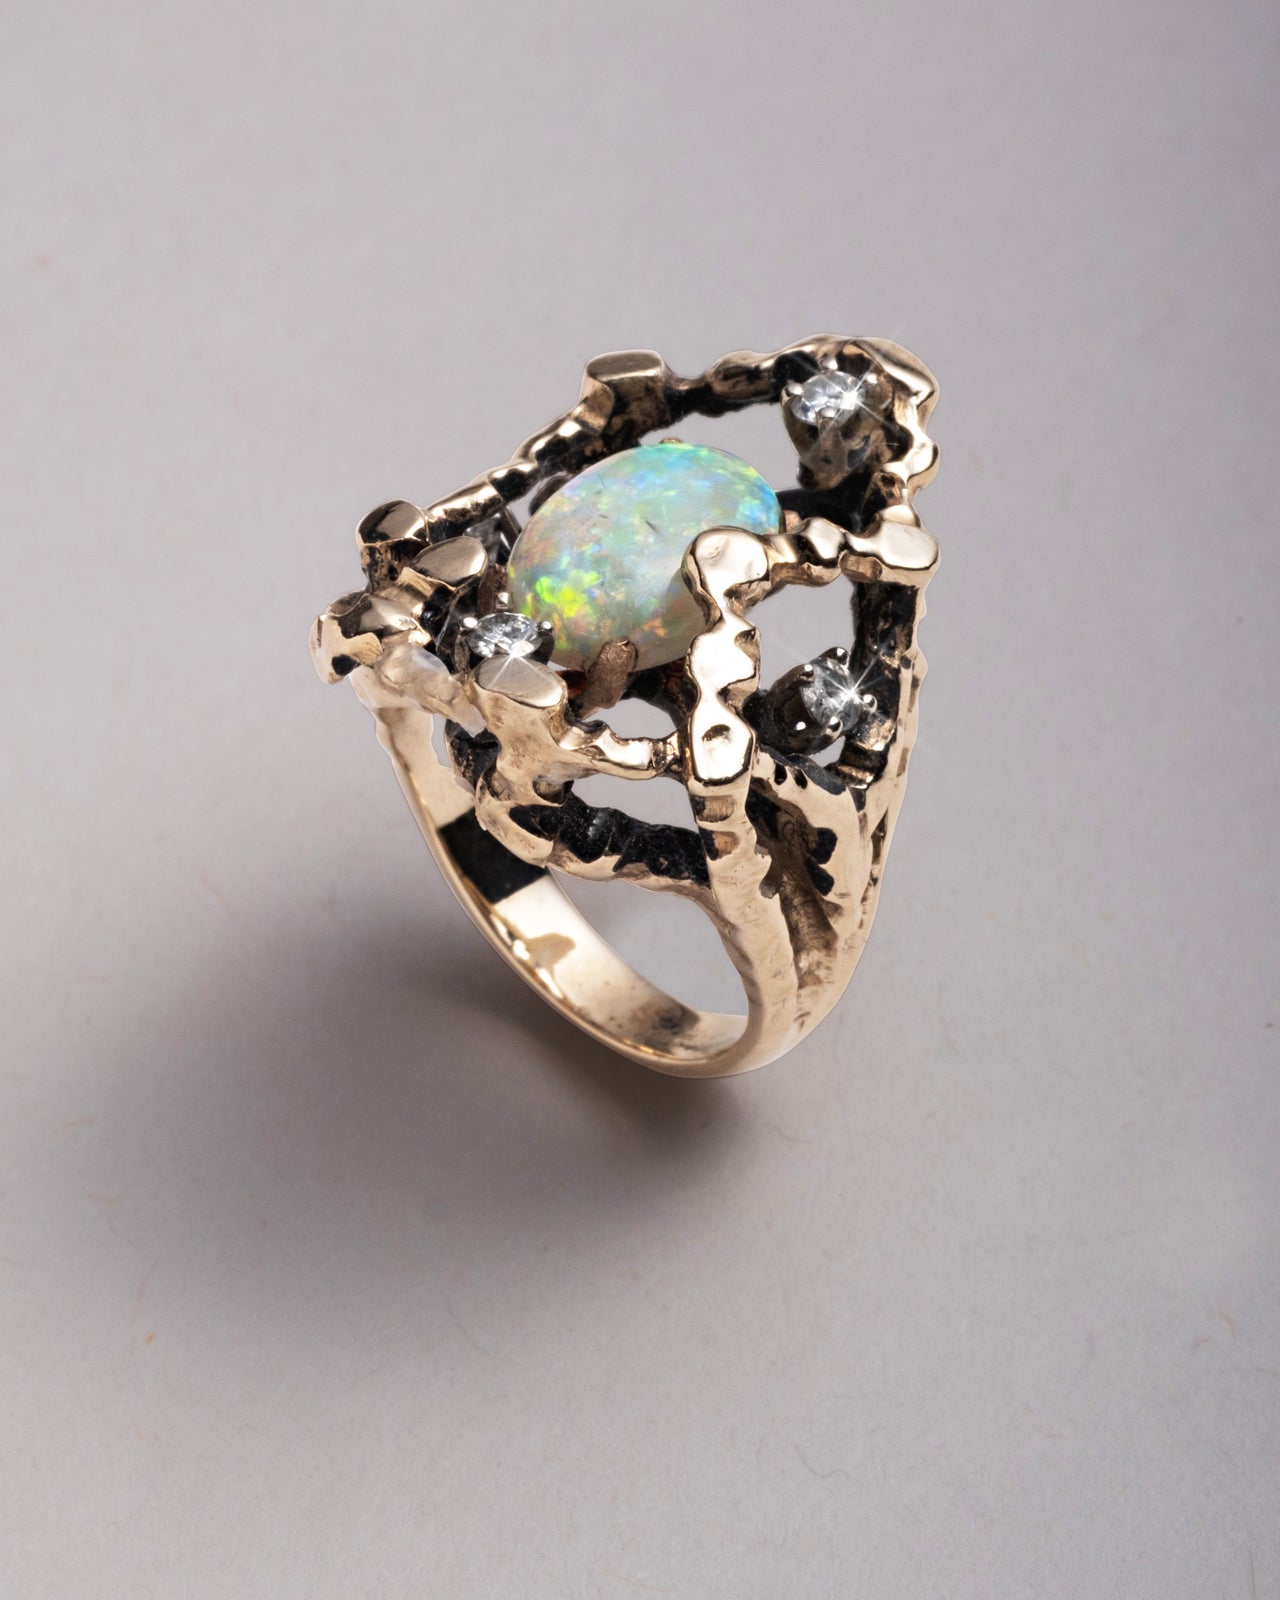 Vintage 1970s 14k Gold Brutalist Opal and Diamond Ring - Photo 2